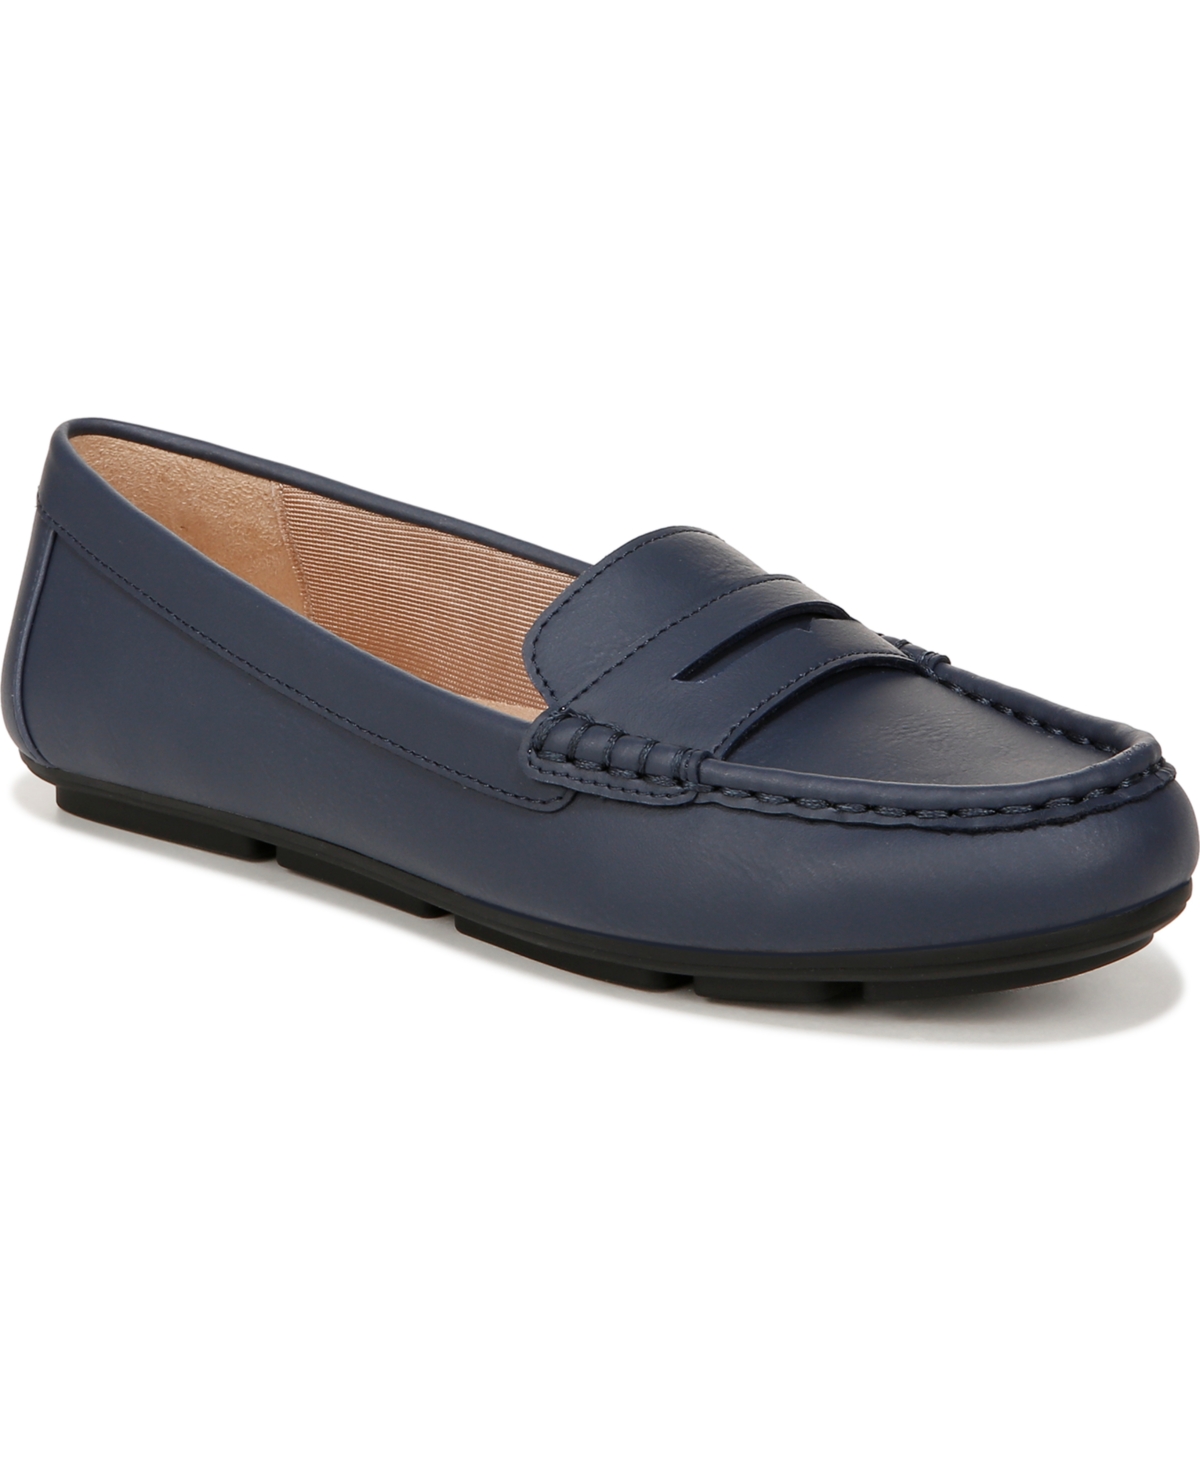 Lifestride Riviera Slip-on Loafers In Lux Navy Faux Leather